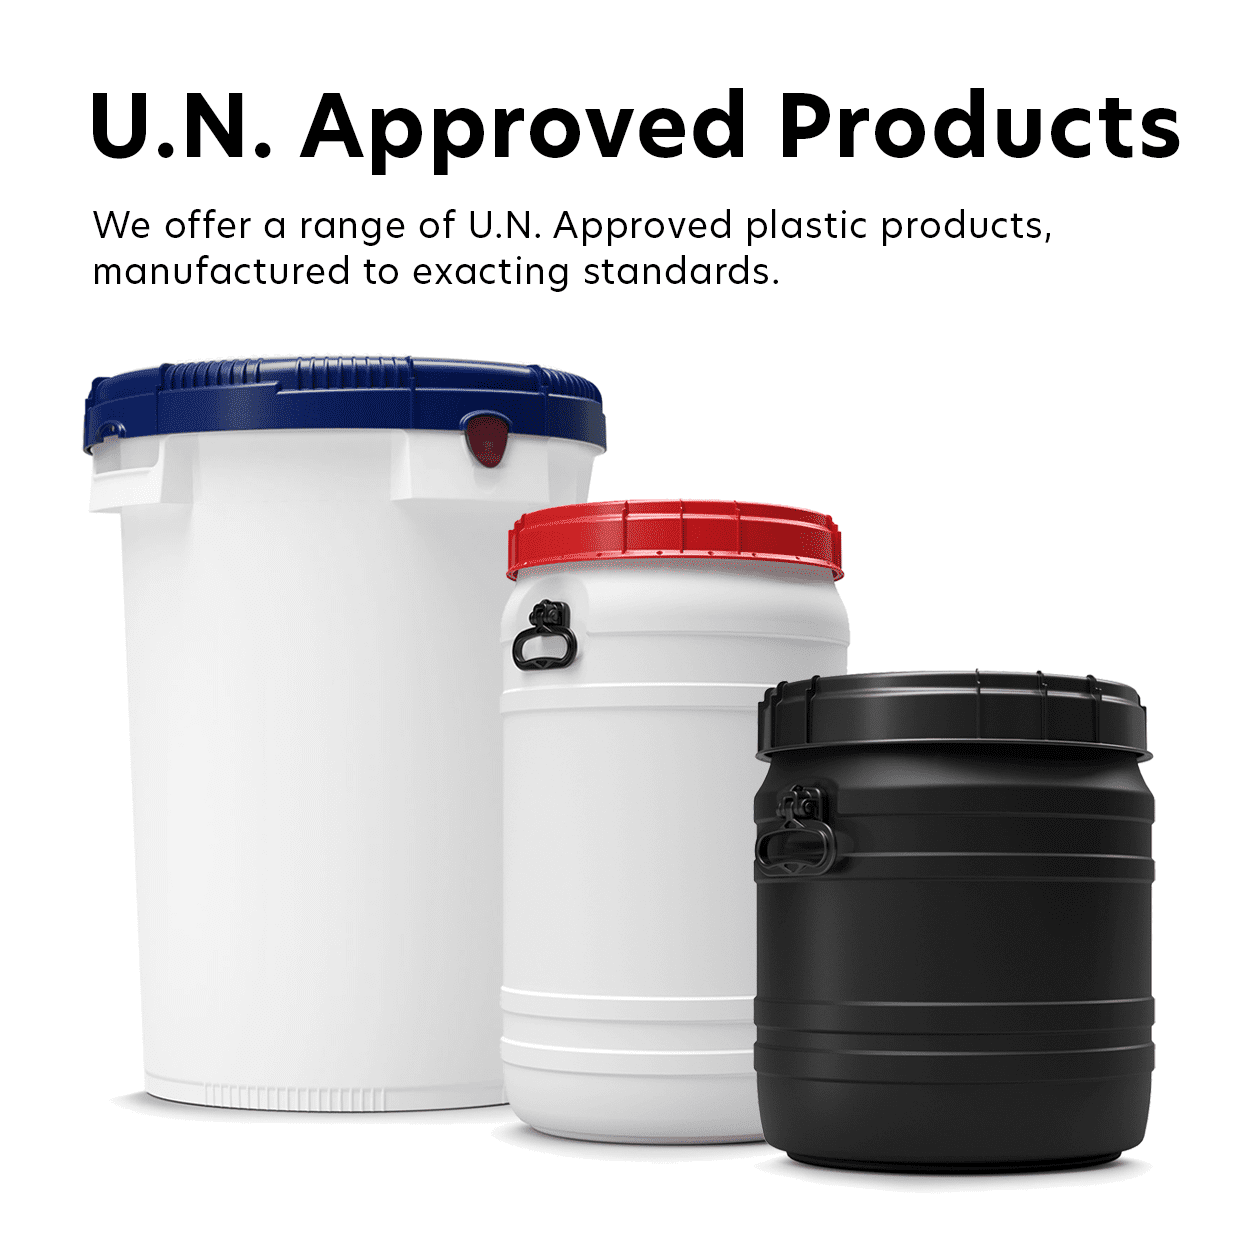 U. N. Approved Products